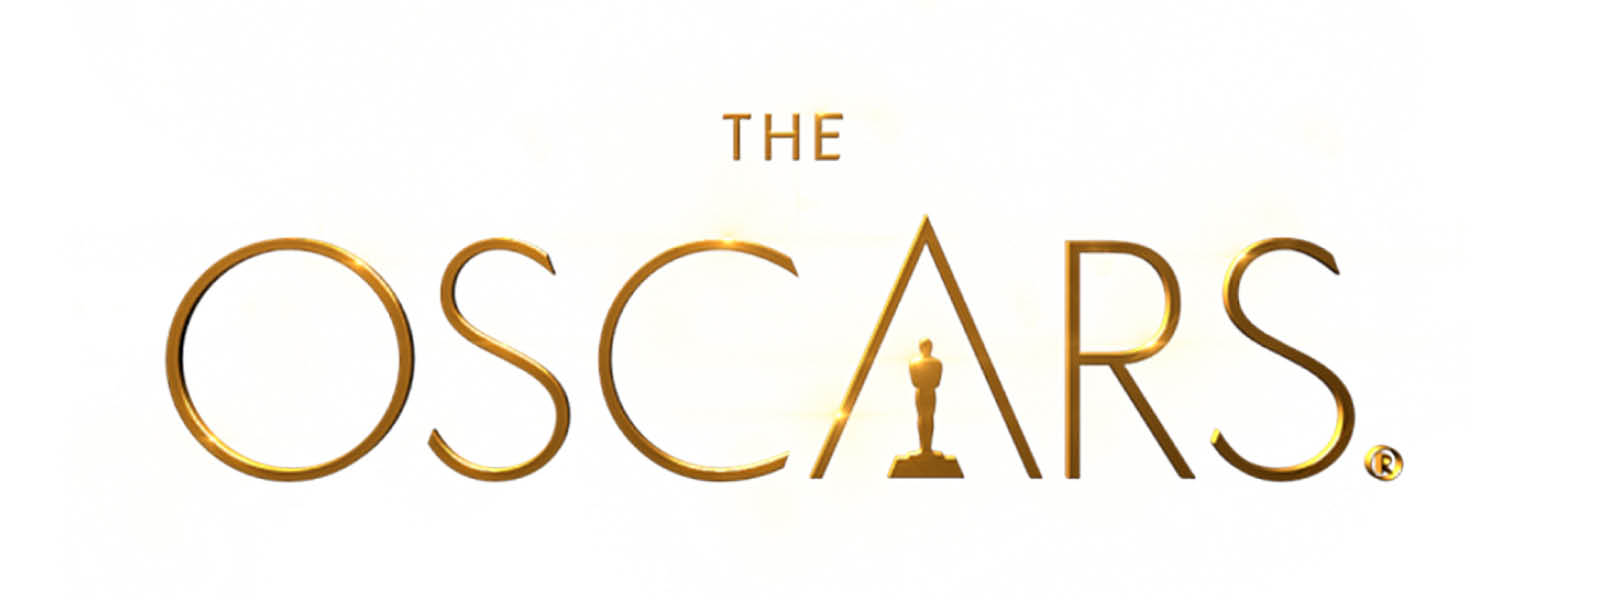 Oscar nominees for best film and best animated film have alumni connections  - UNCSA